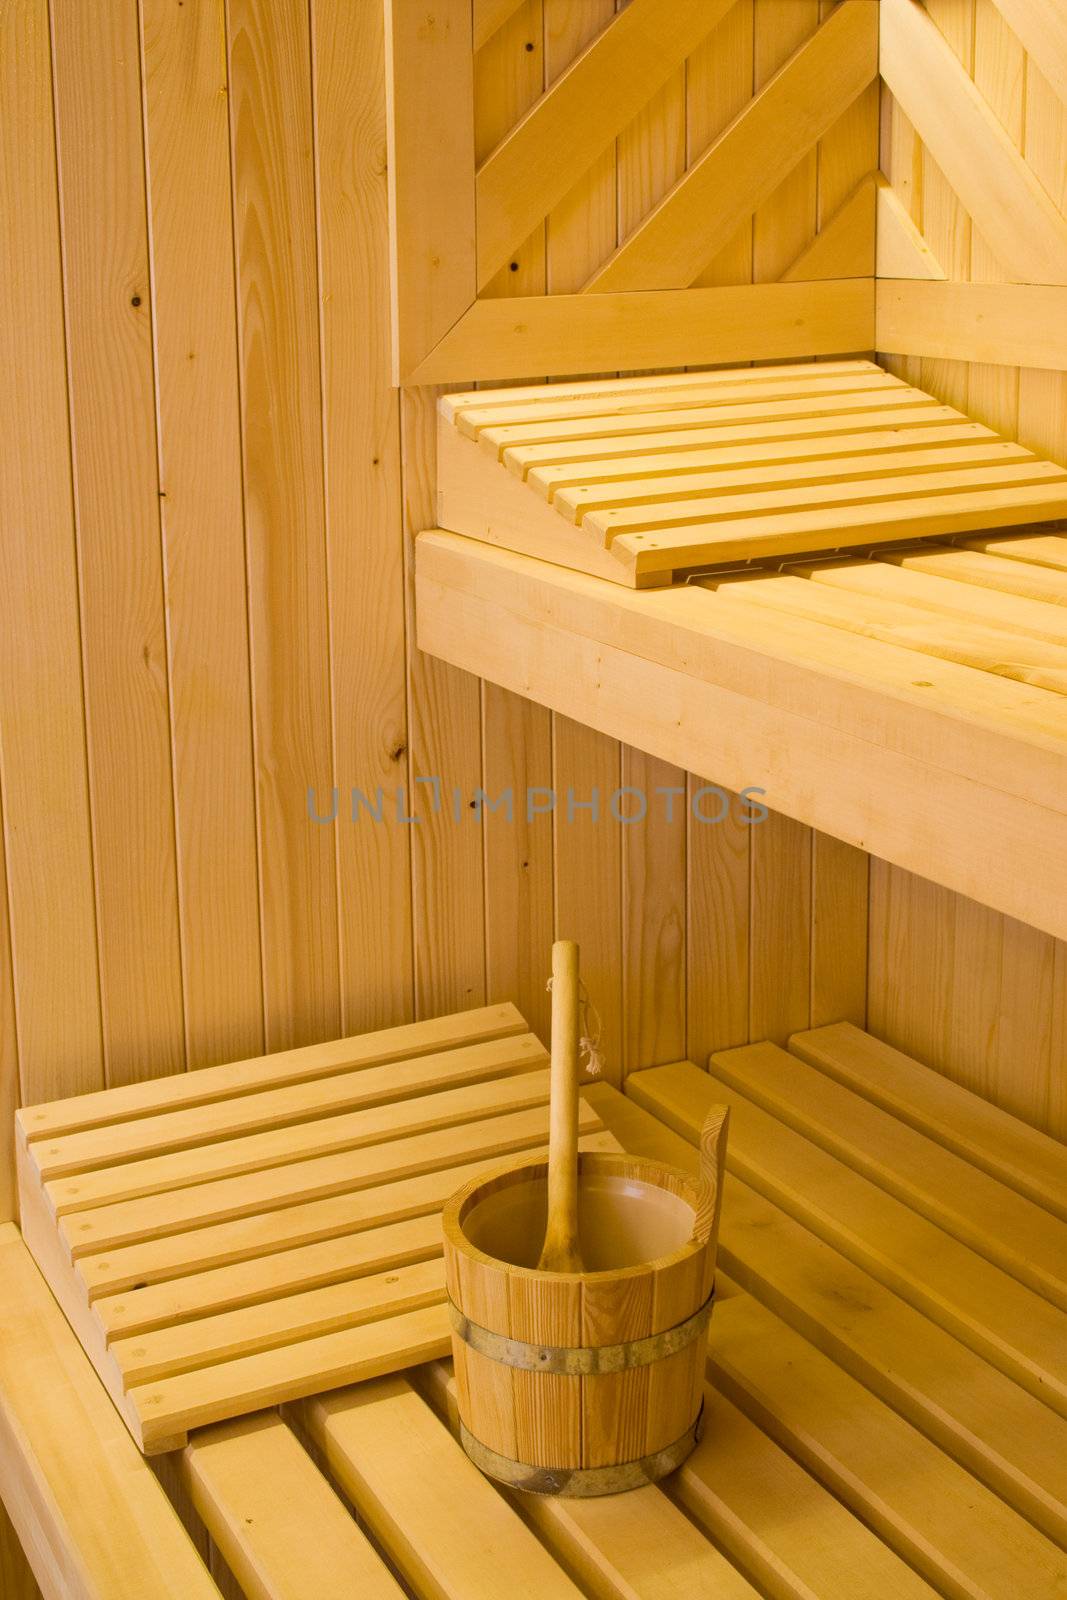 Bucket for water and two pillows on bench in Finnish sauna.